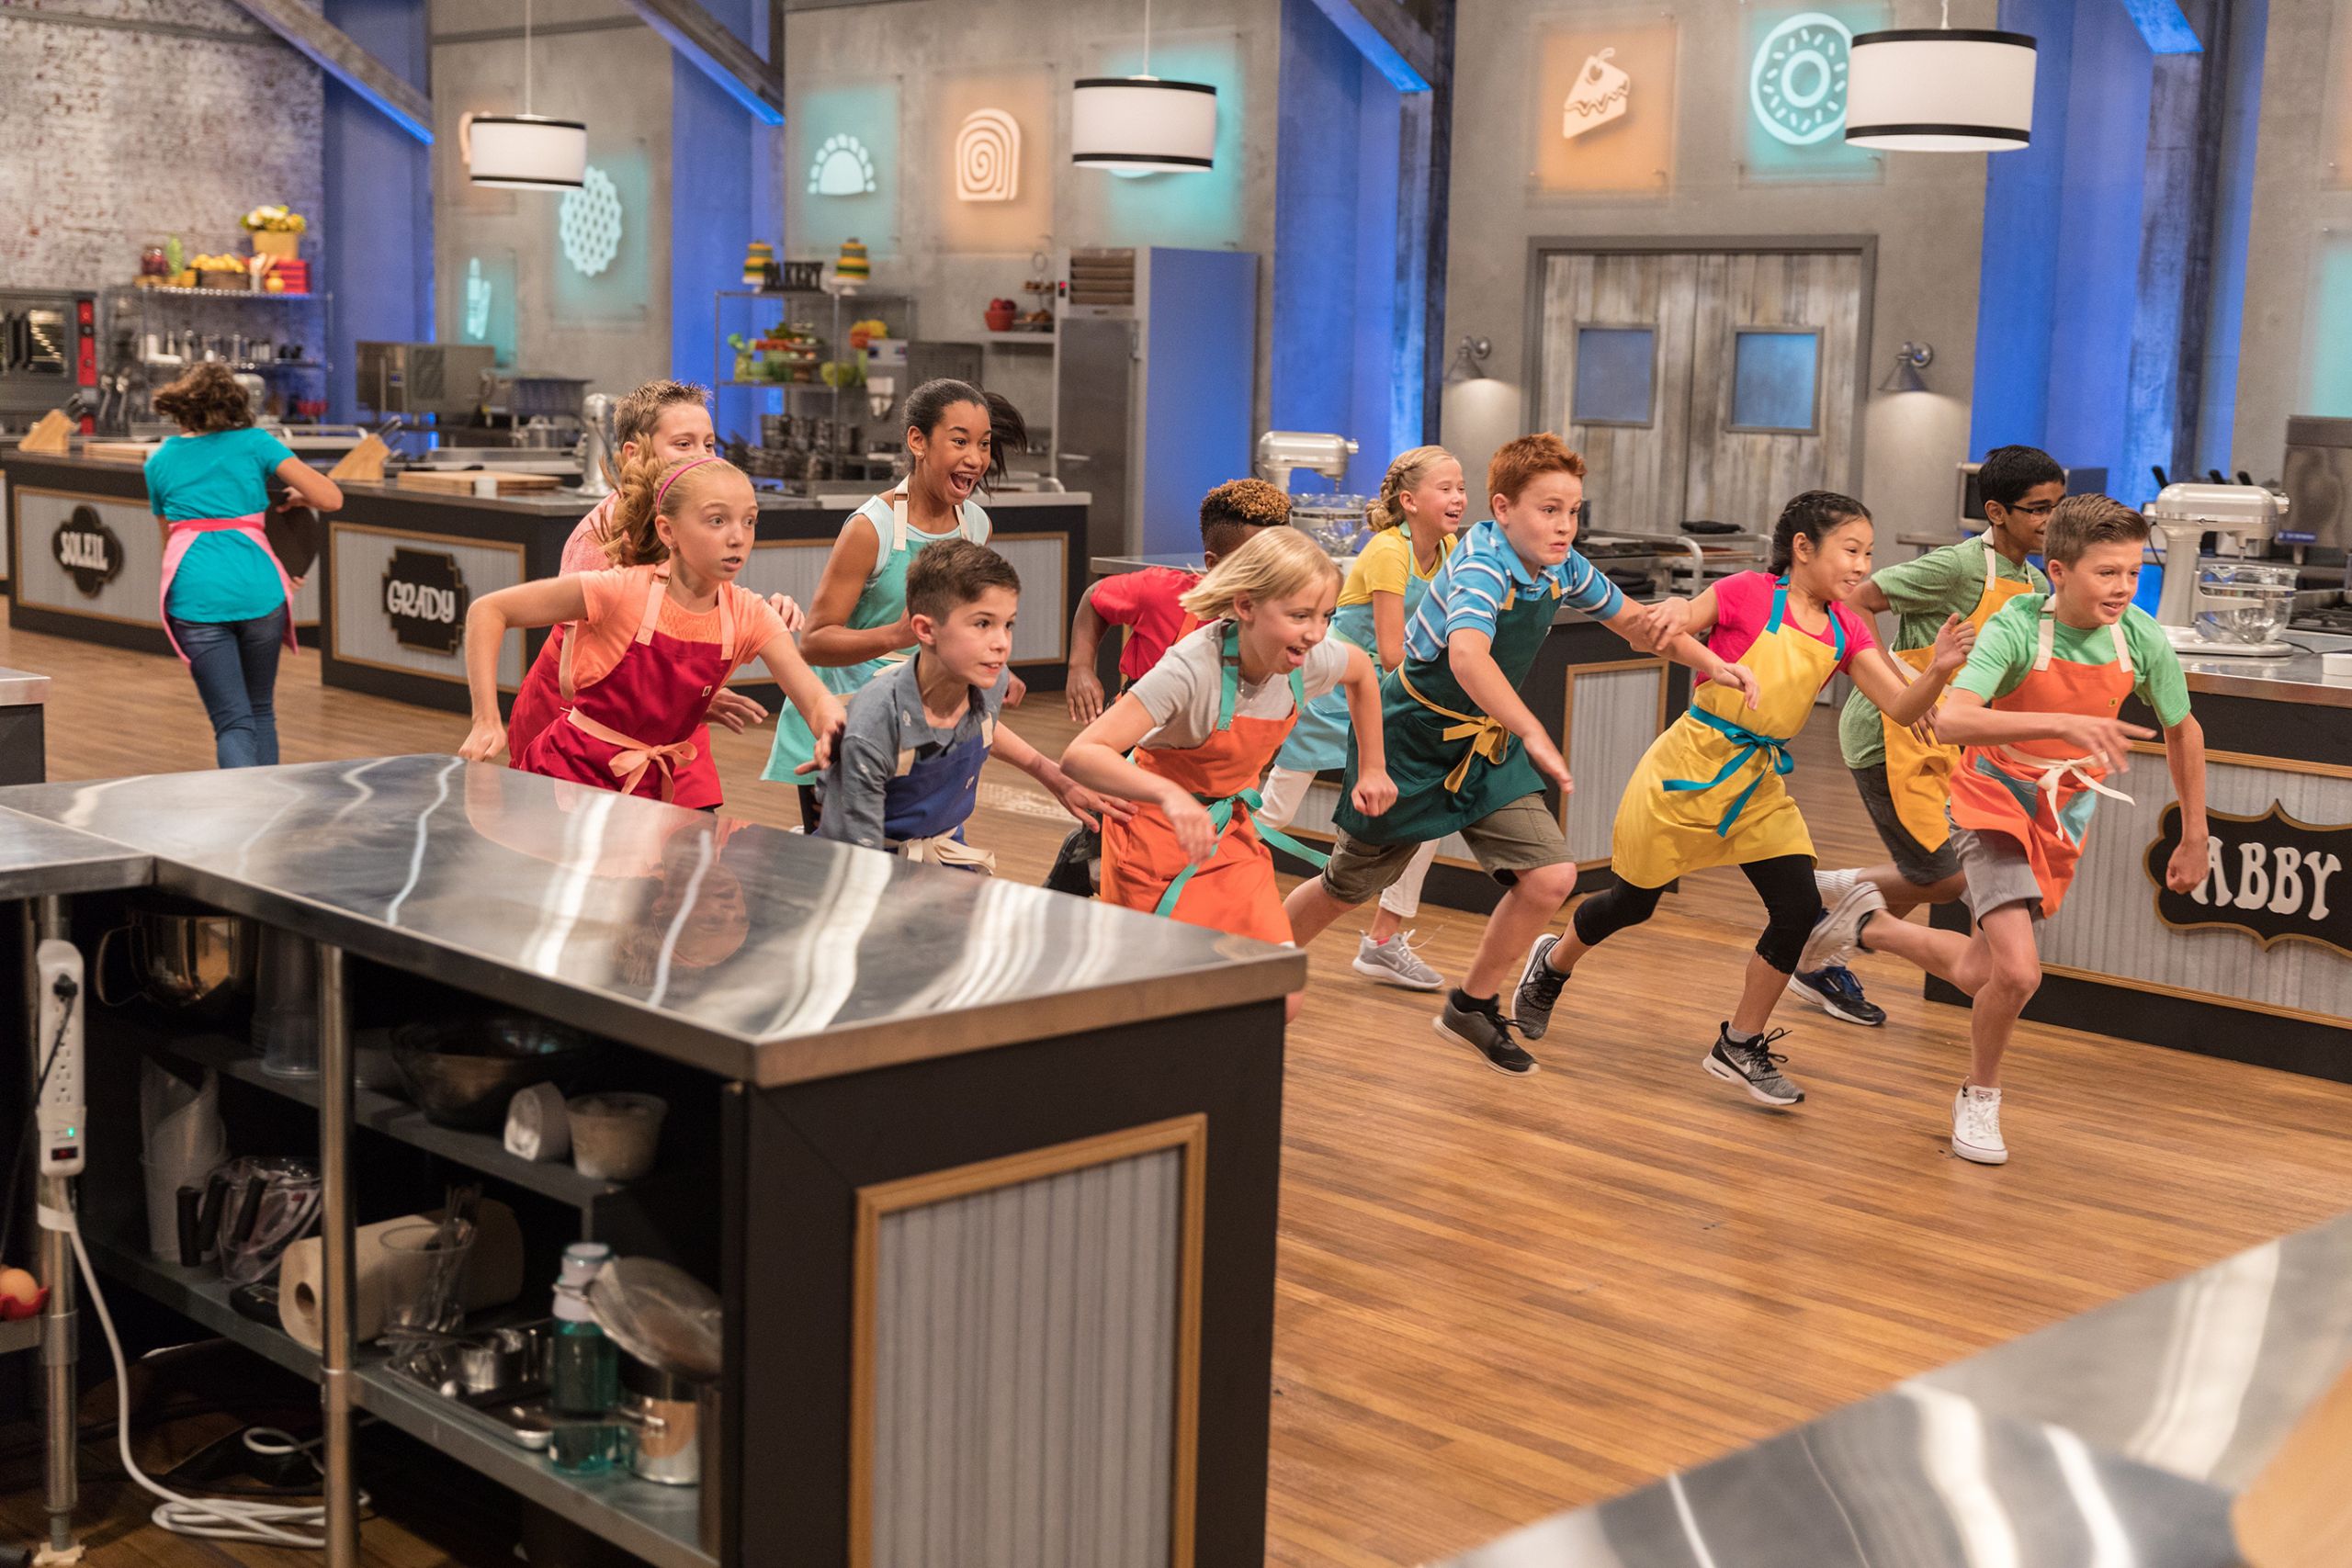 Kids Baking Championship Recipes
 A Dozen Kid Bakers Bring Big Skills In The New Year The